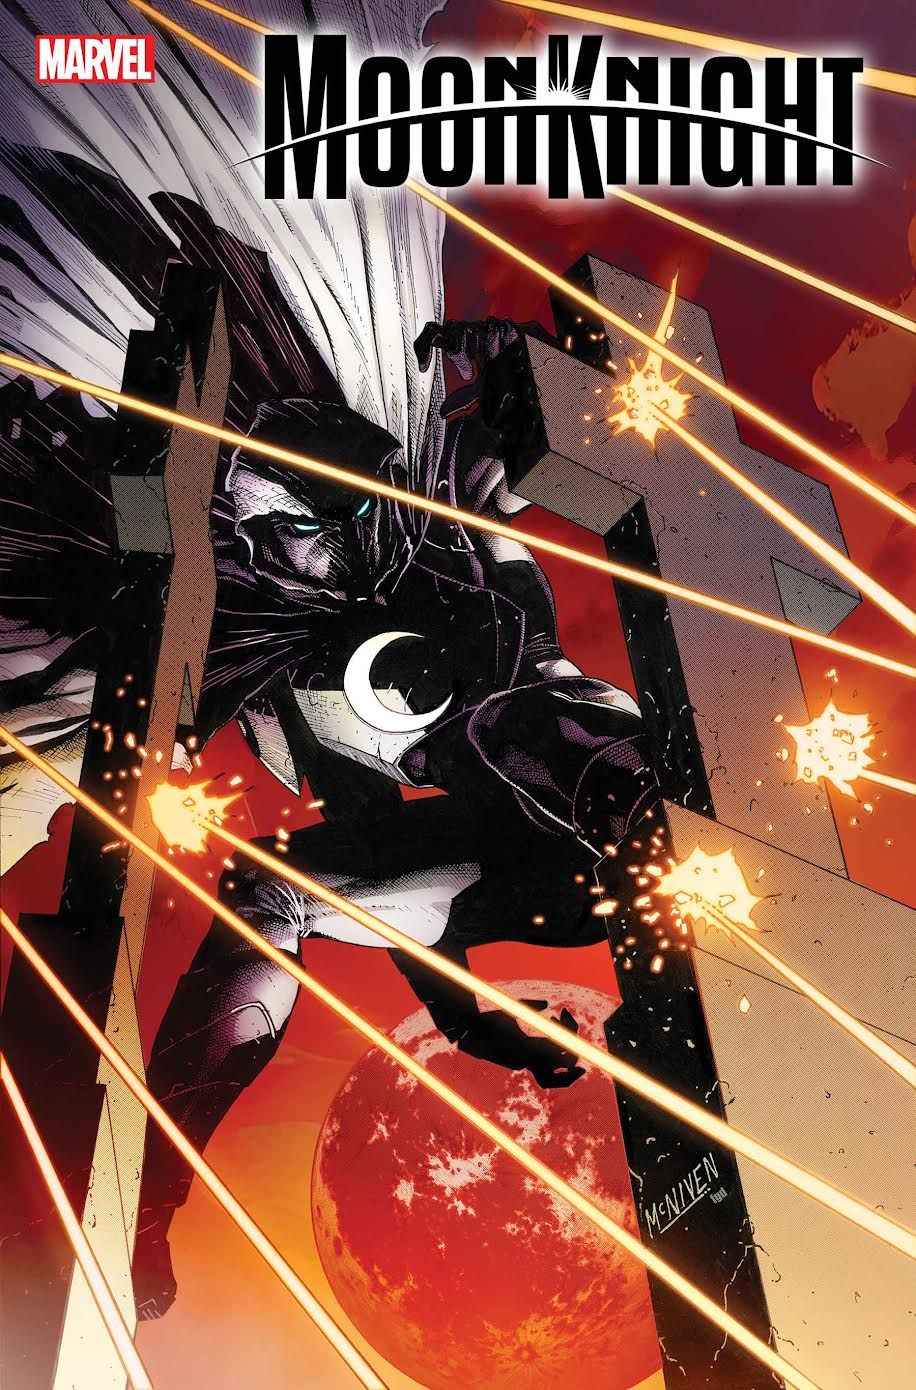 Layla El-Faouly, a character from Disney+'s Moon Knight series, is making her Marvel Comics debut.